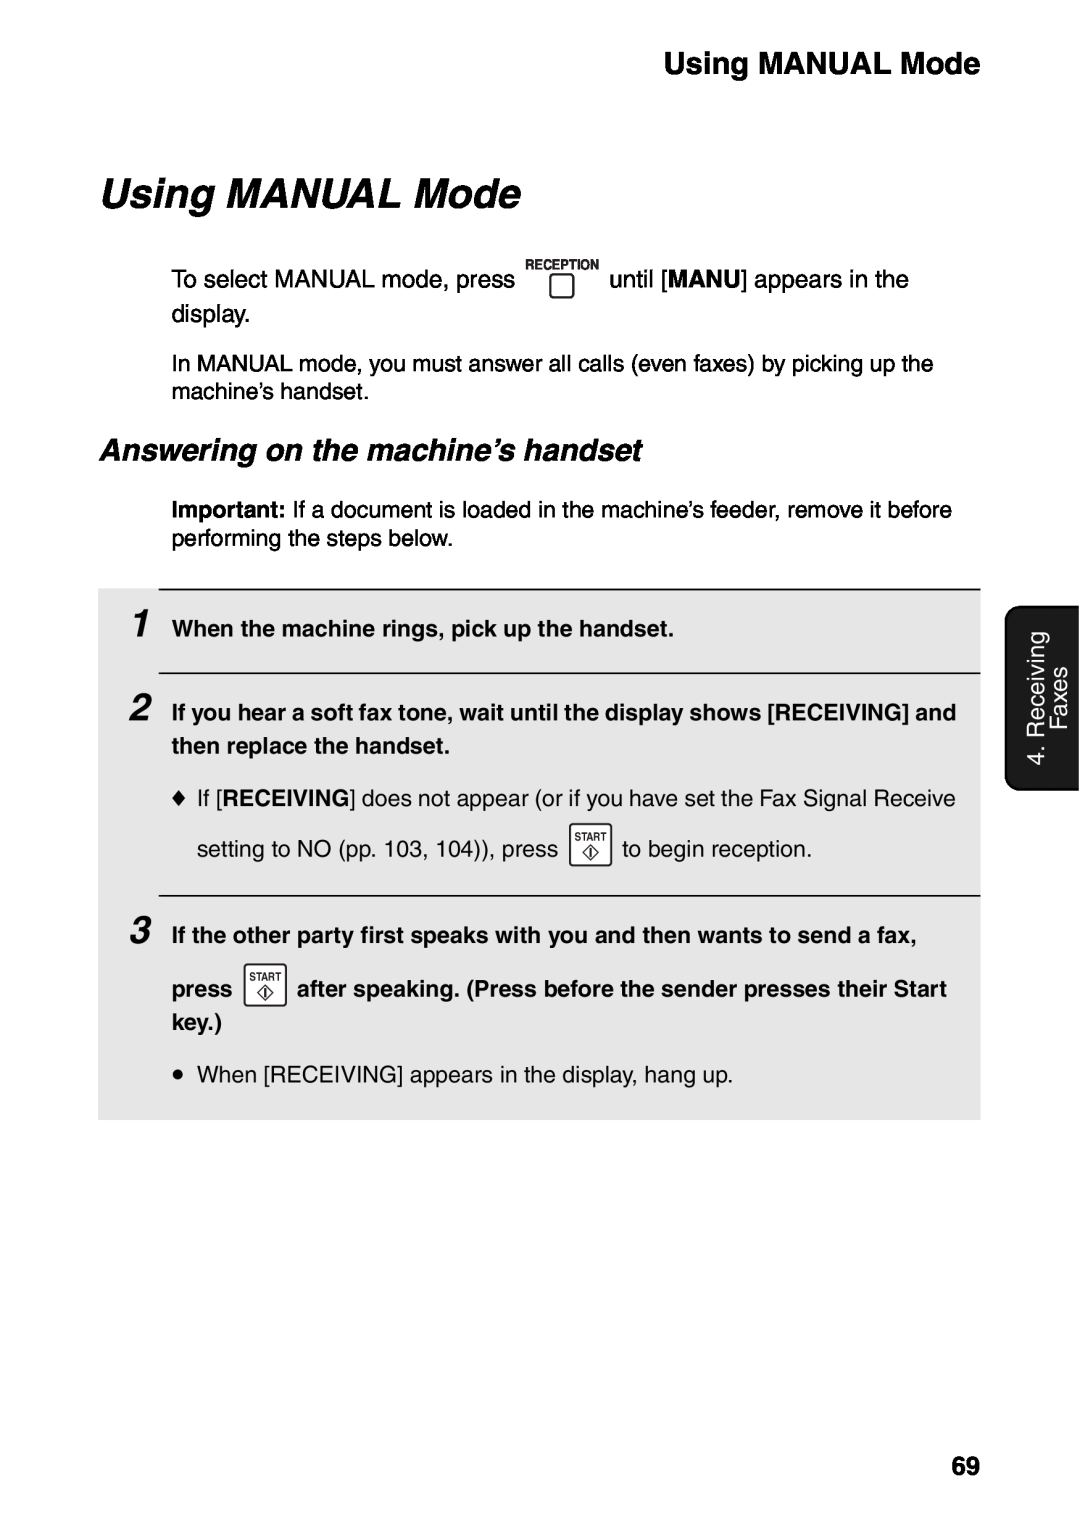 Sharp FO-IS115N operation manual Using MANUAL Mode, Answering on the machine’s handset, Receiving, Faxes 